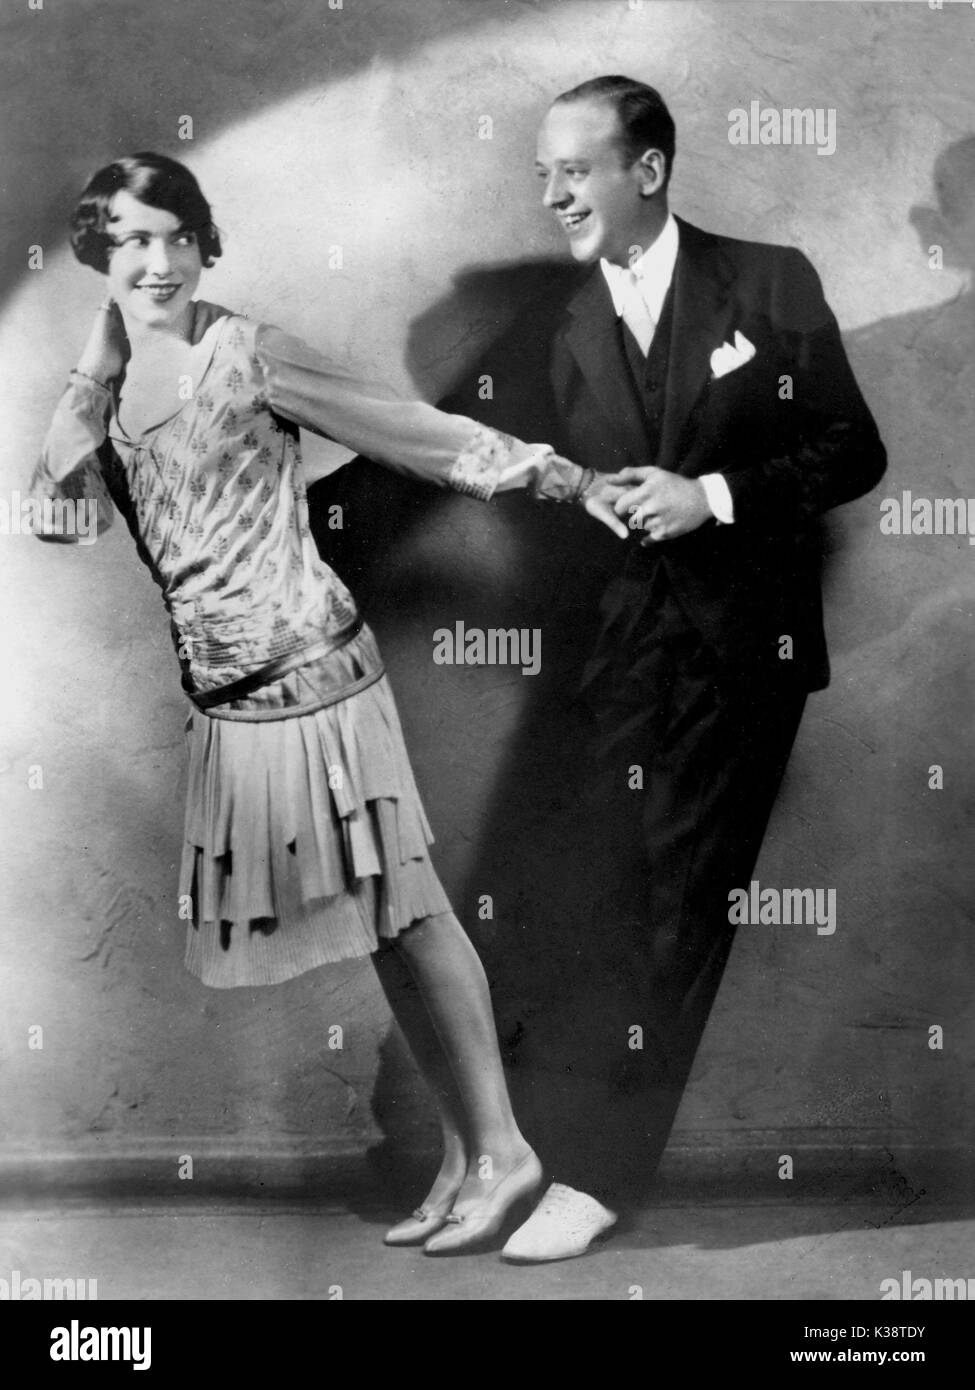 ADELE ASTAIRE, FRED ASTAIRE Stock Photo - Alamy